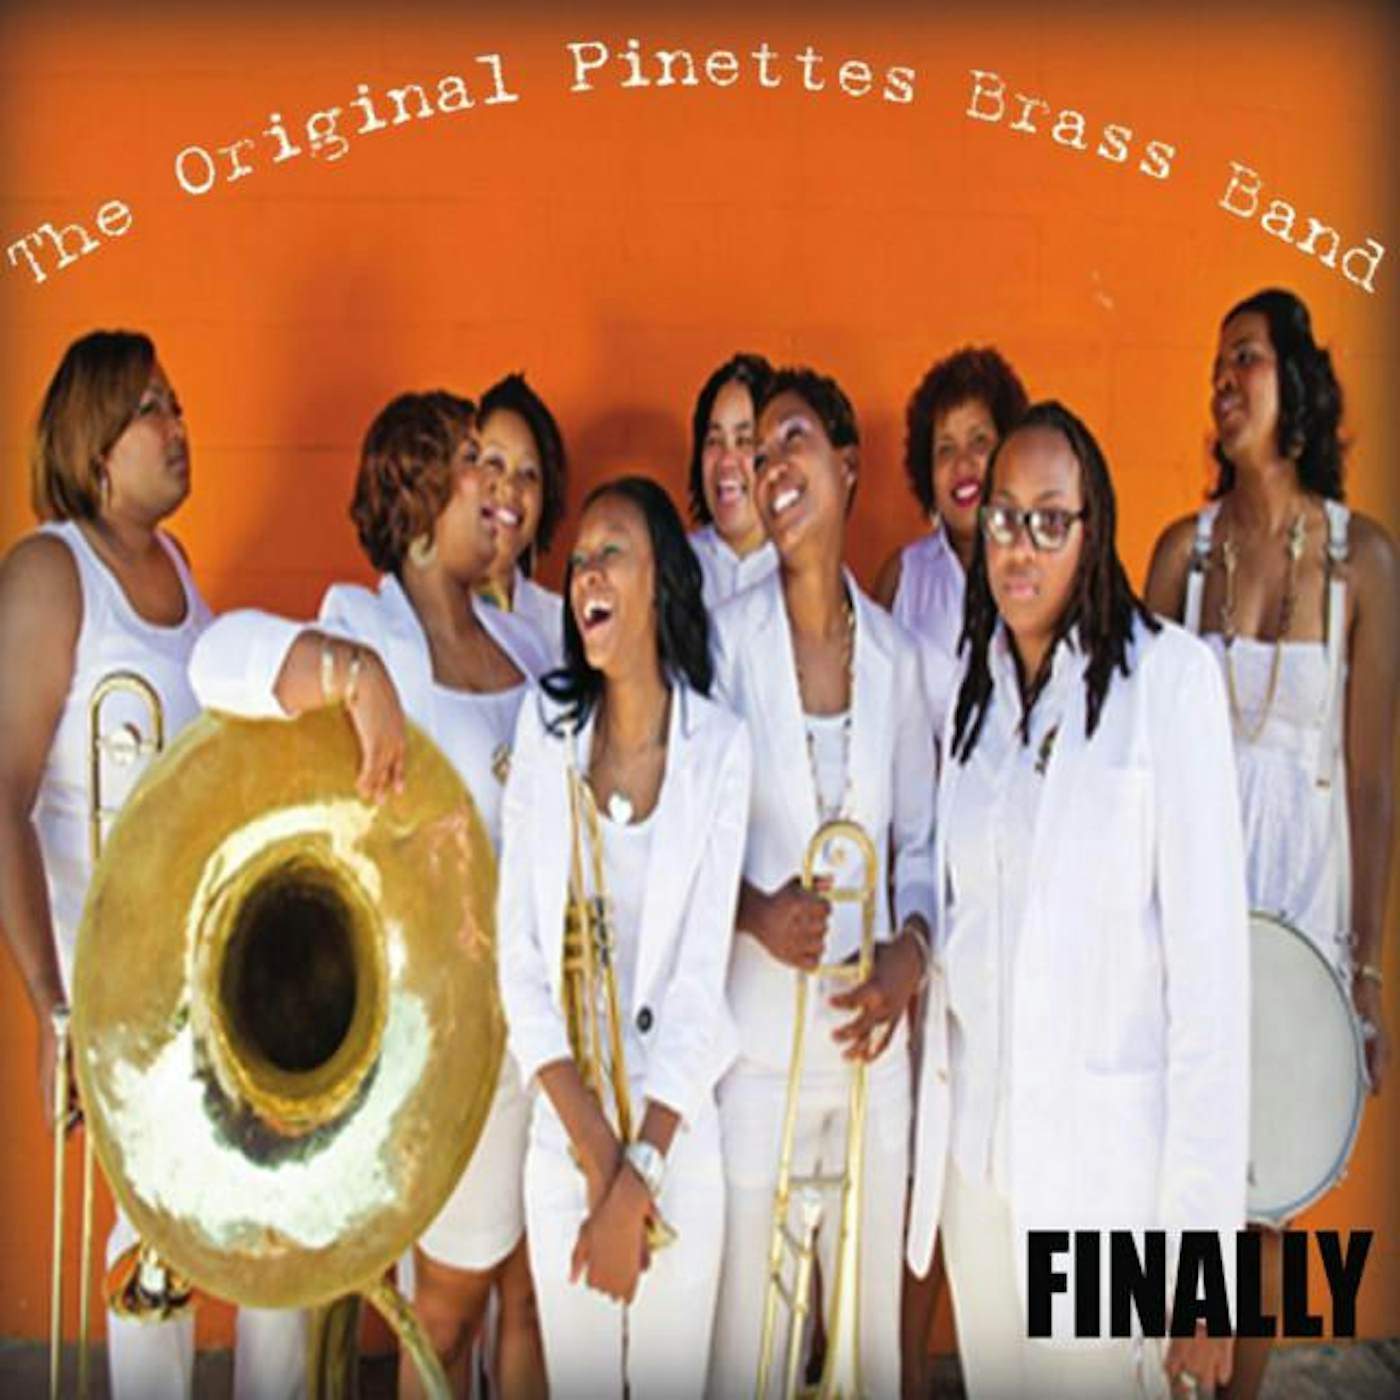 The Original Pinettes Brass Band